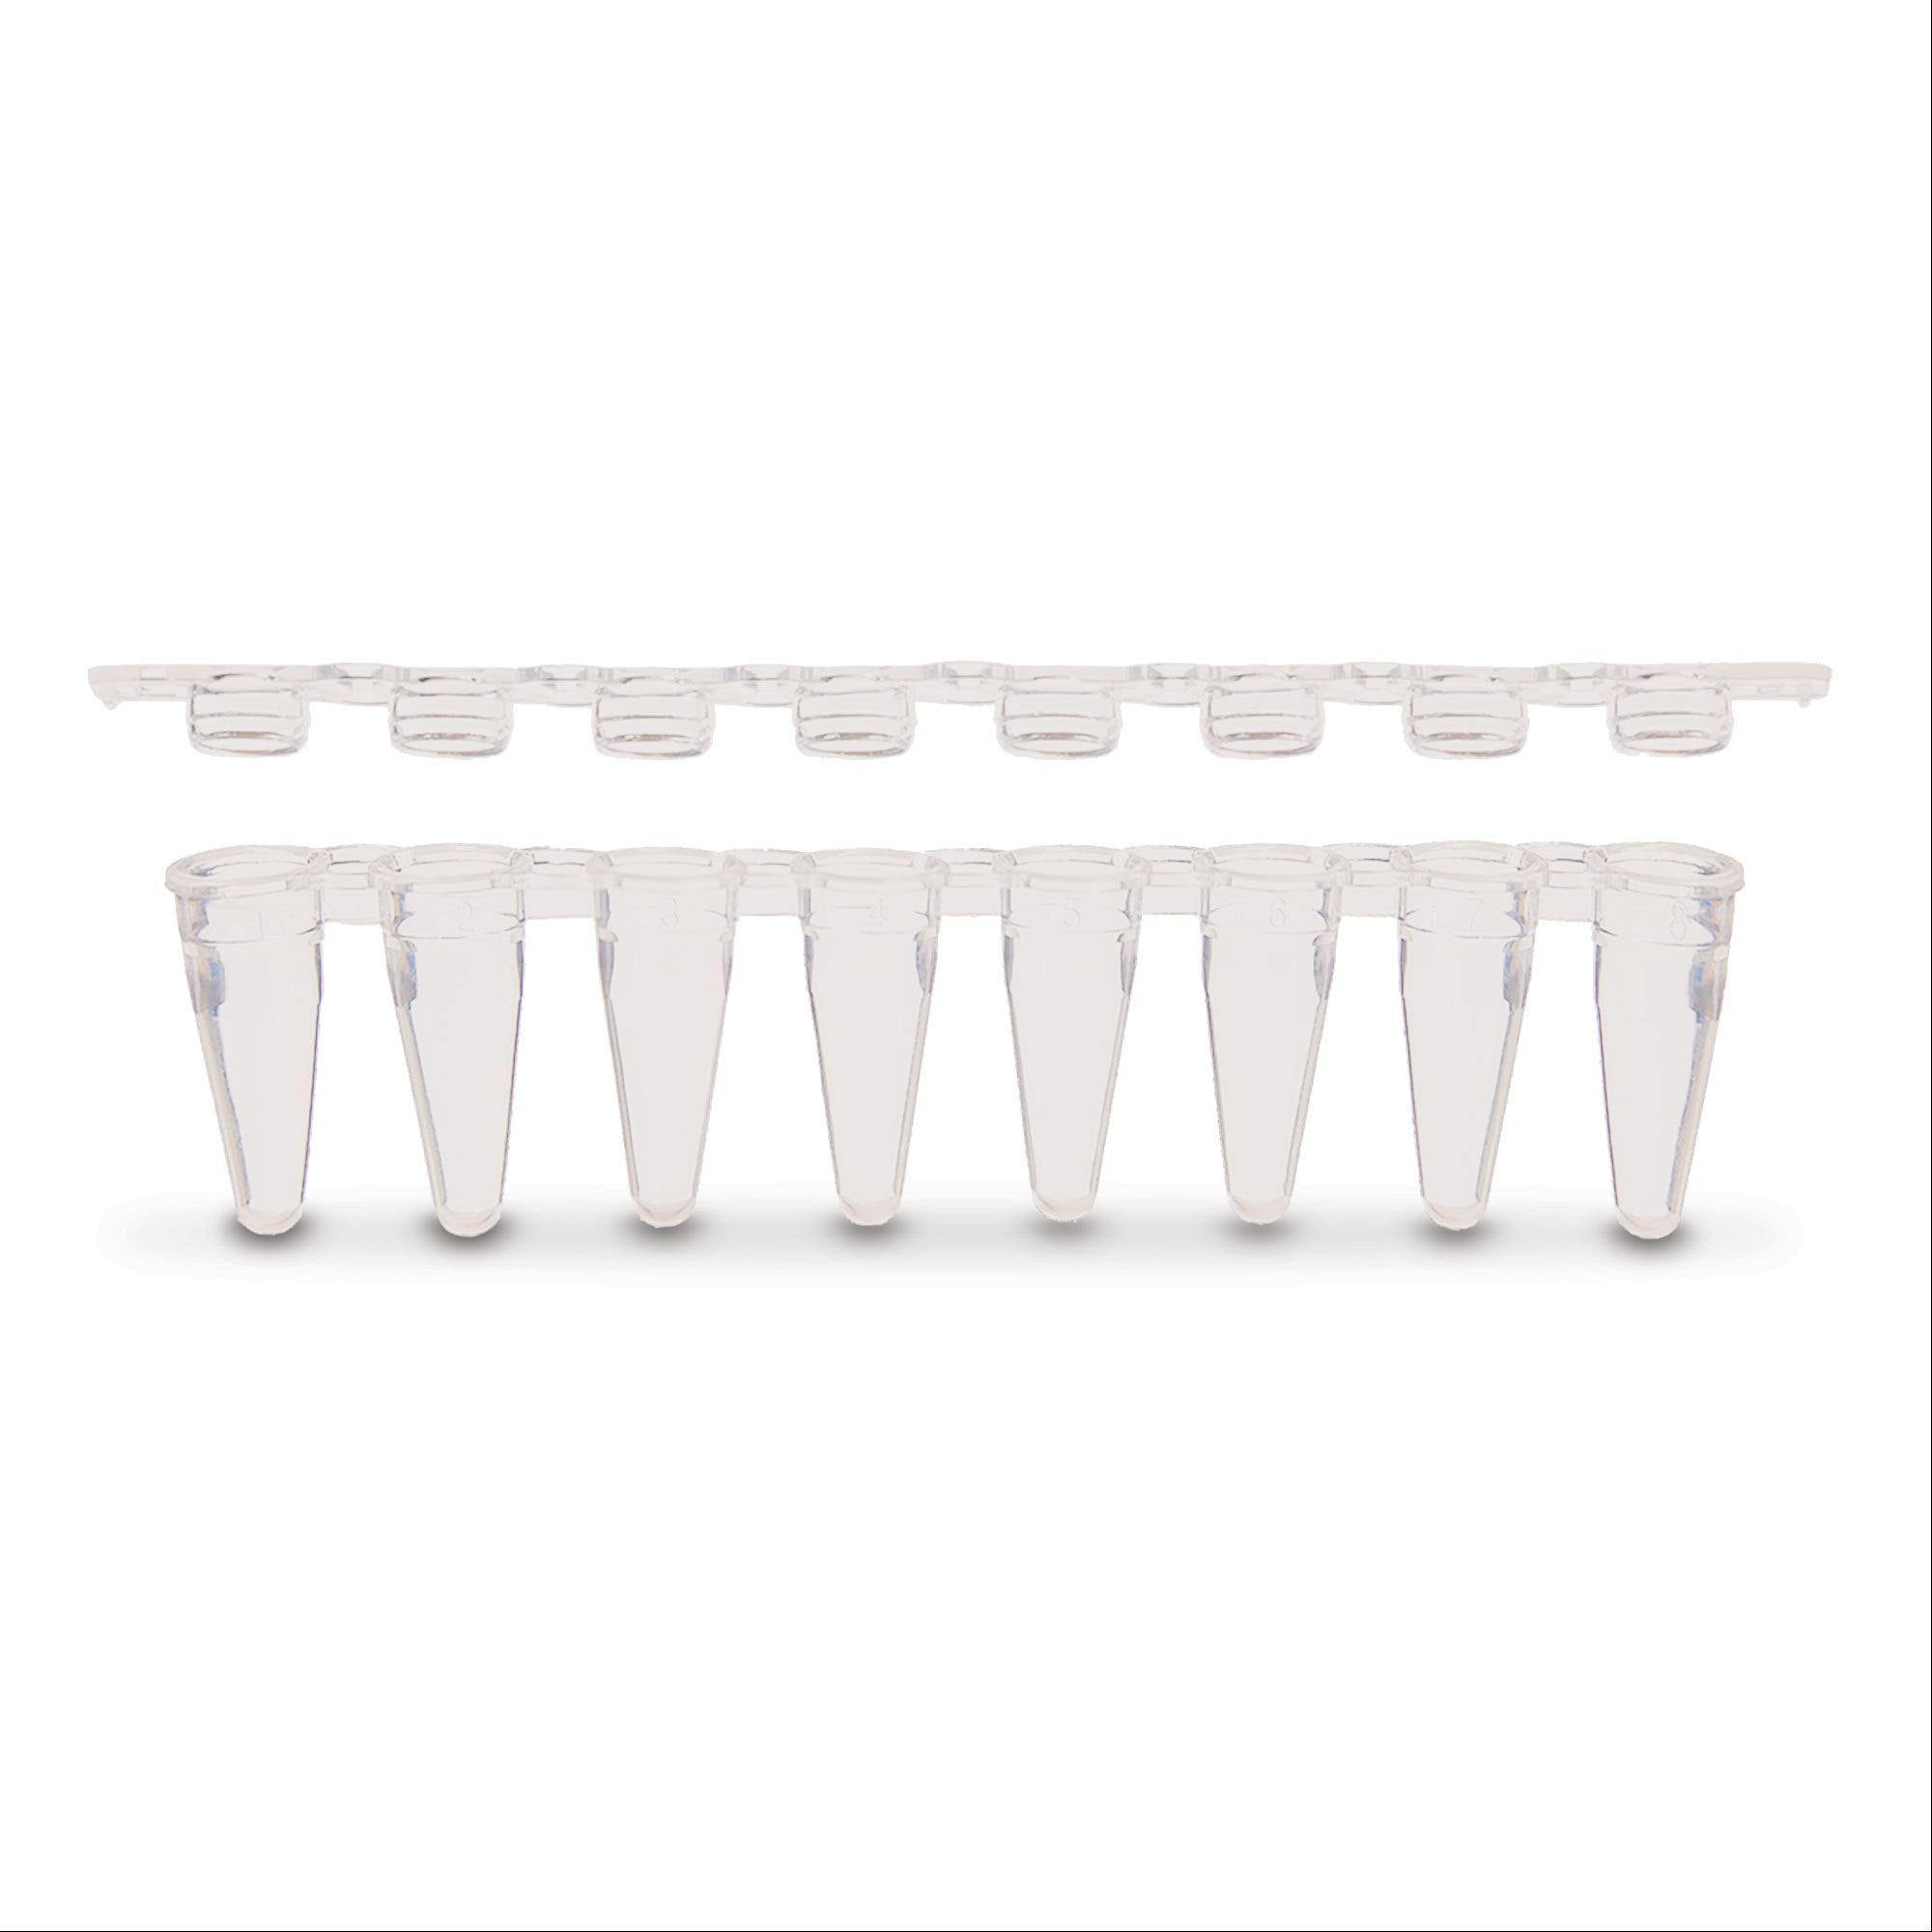 PCR Tubes with Strip Dome Caps Flat Cap • Clear ,1Pack oF 25 - Axiom Medical Supplies